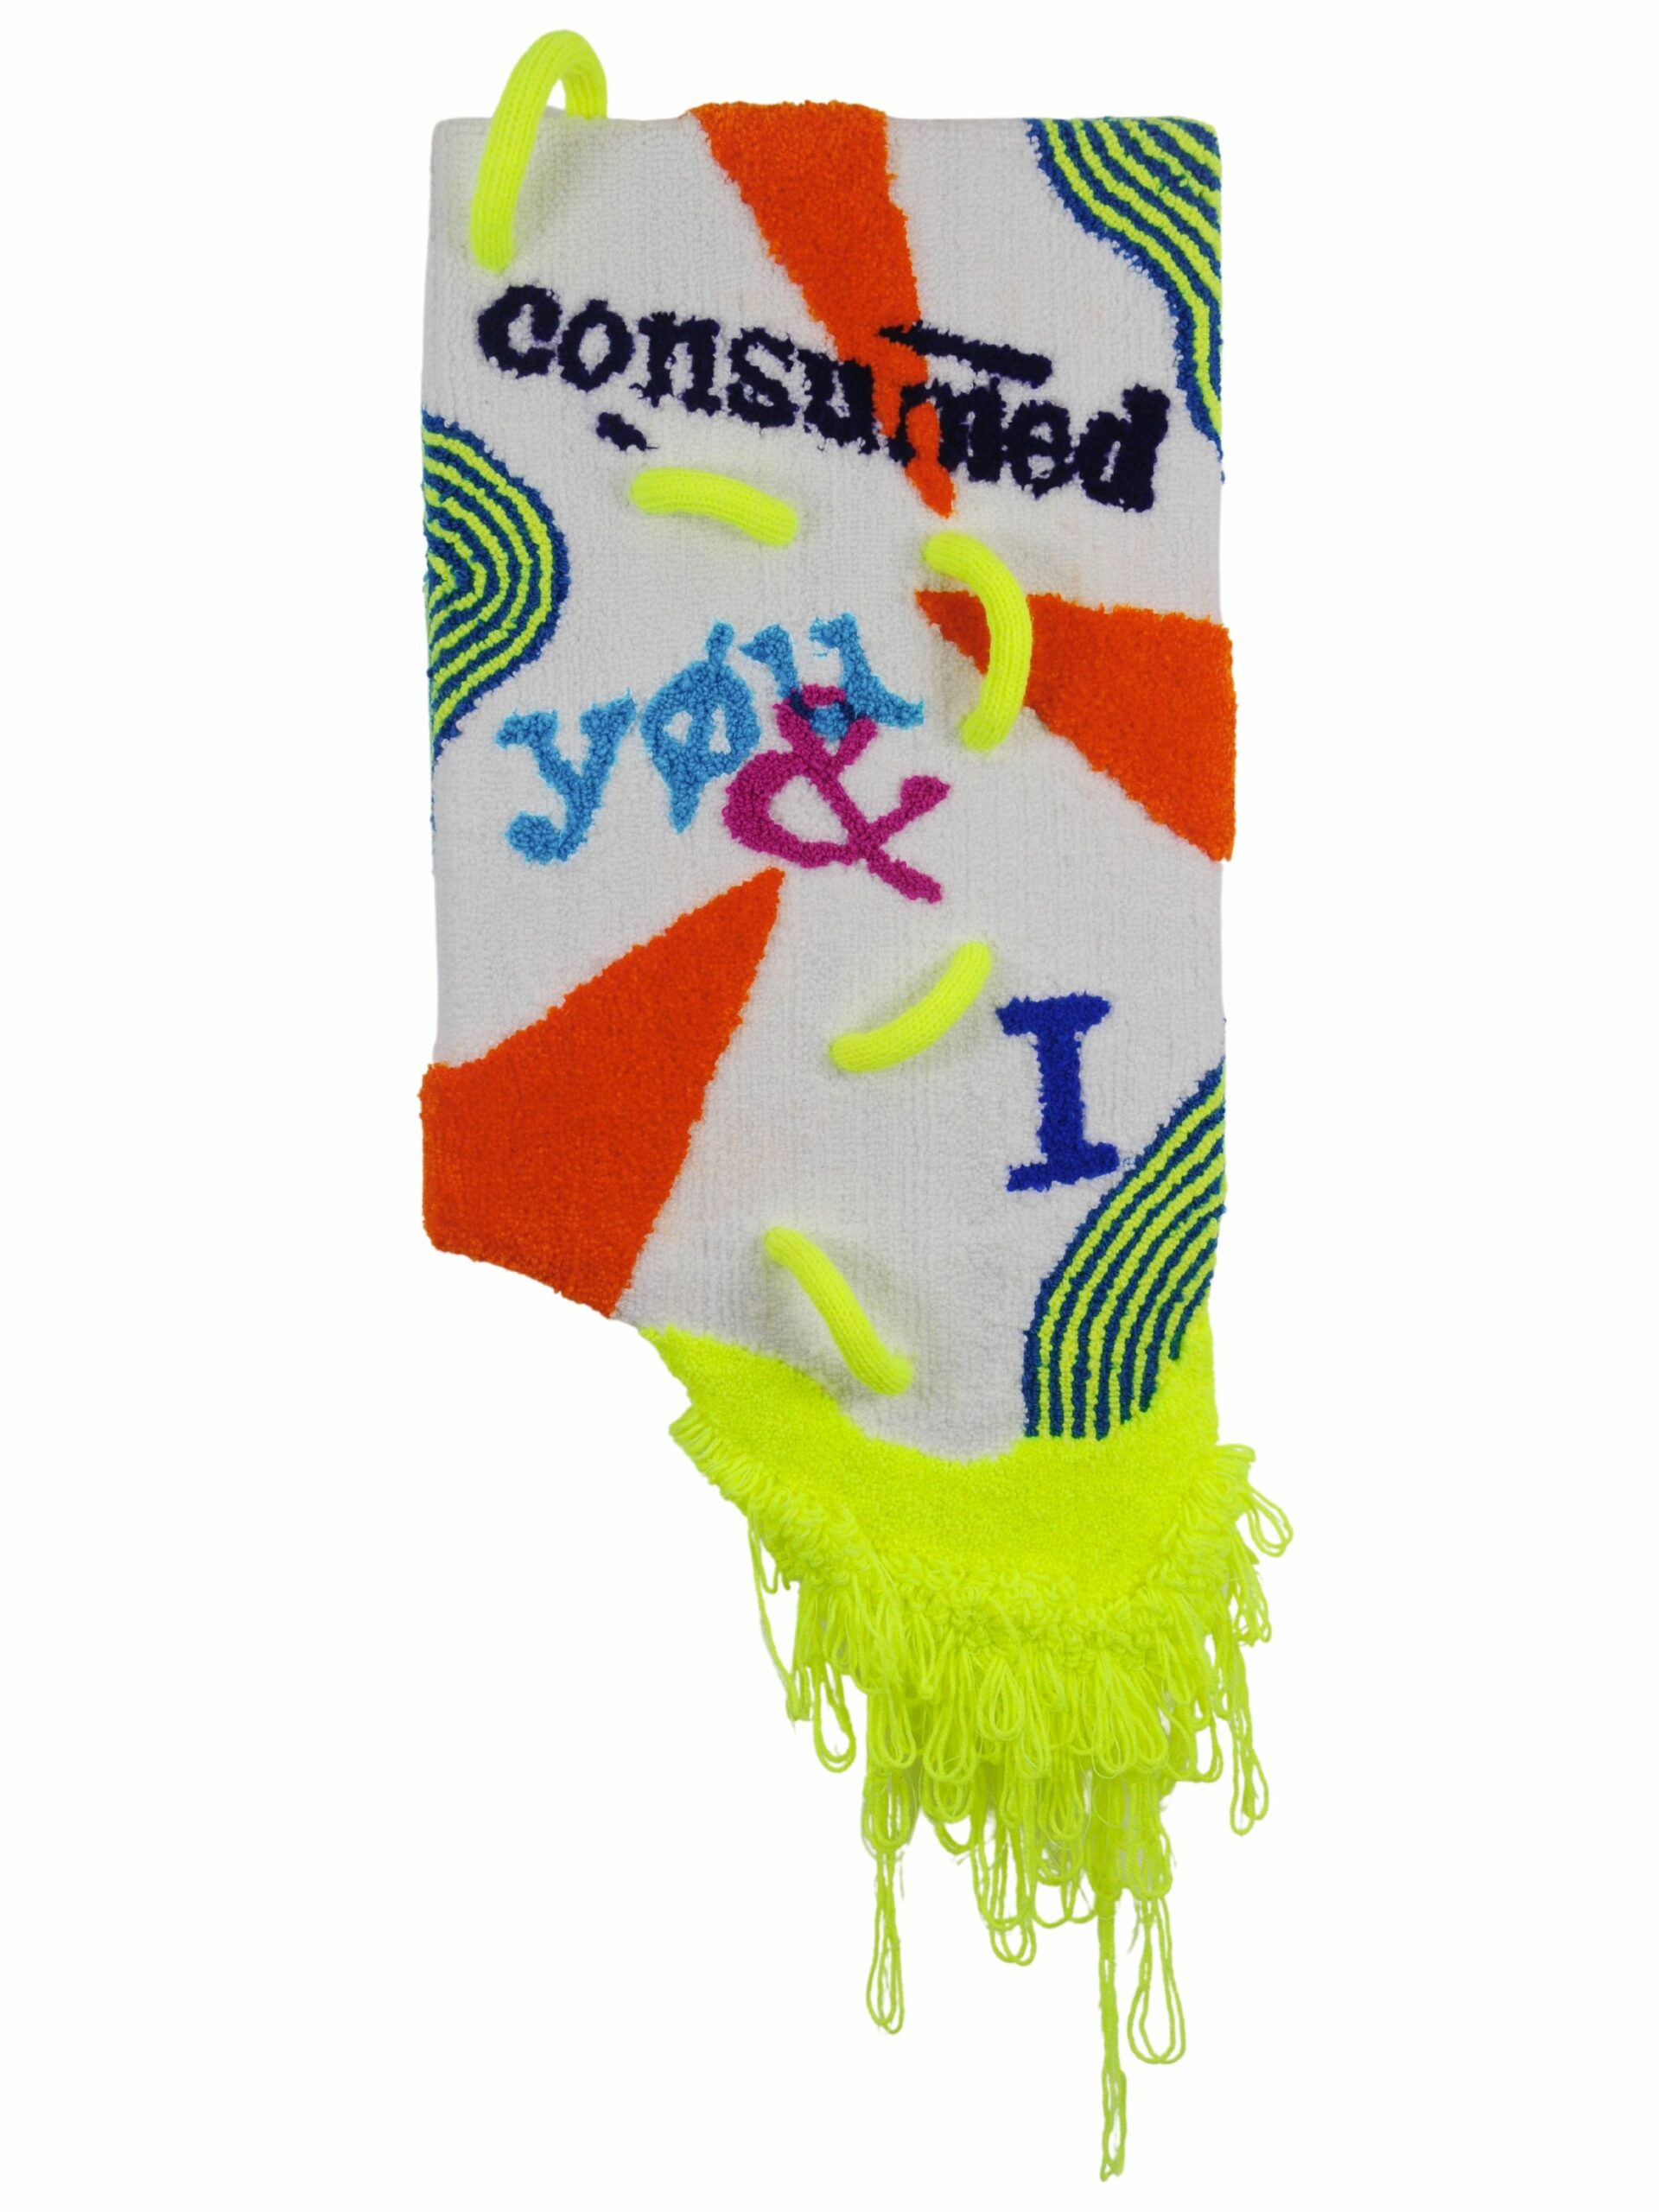 Strips of fabric glued together in neon yellow, orange, blue, and green with text